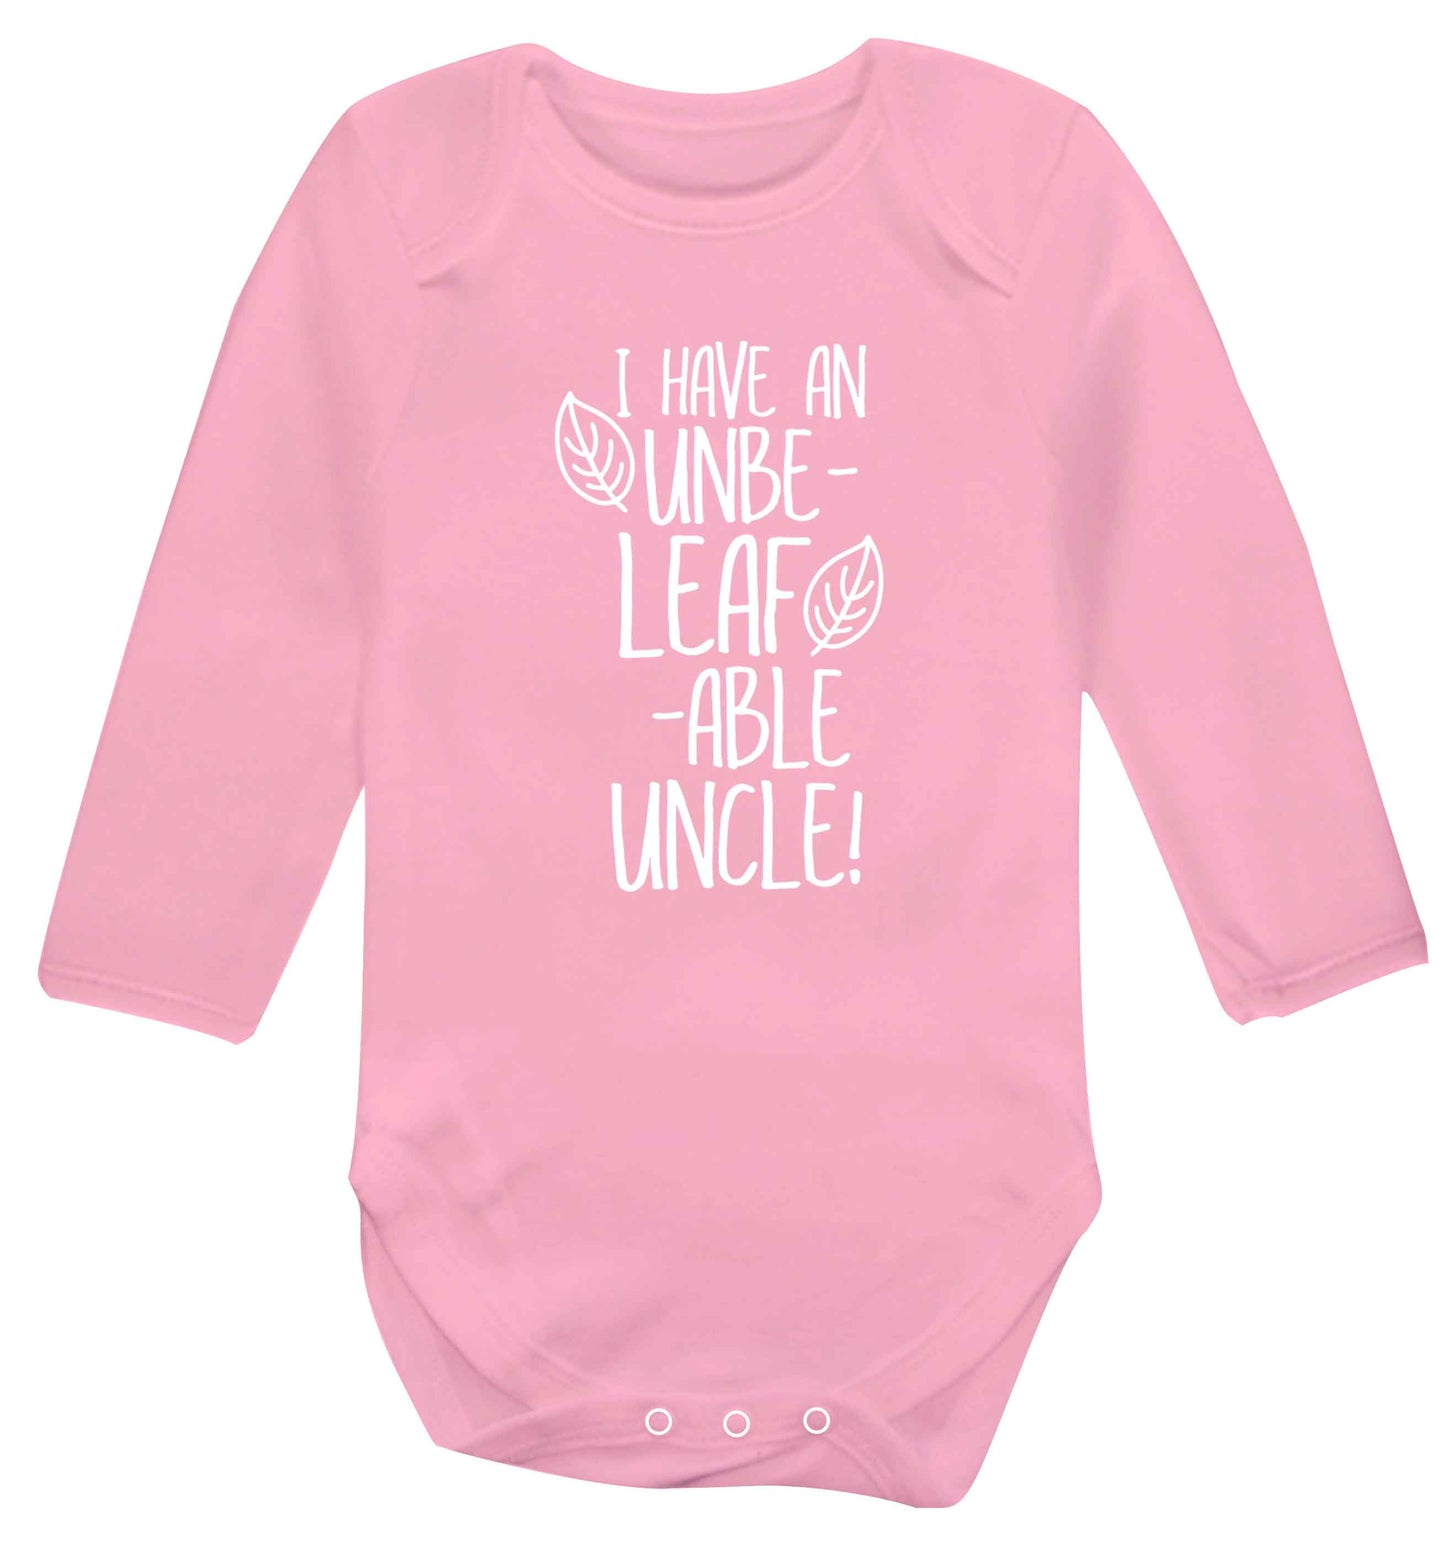 I have an unbe-leaf-able uncle Baby Vest long sleeved pale pink 6-12 months